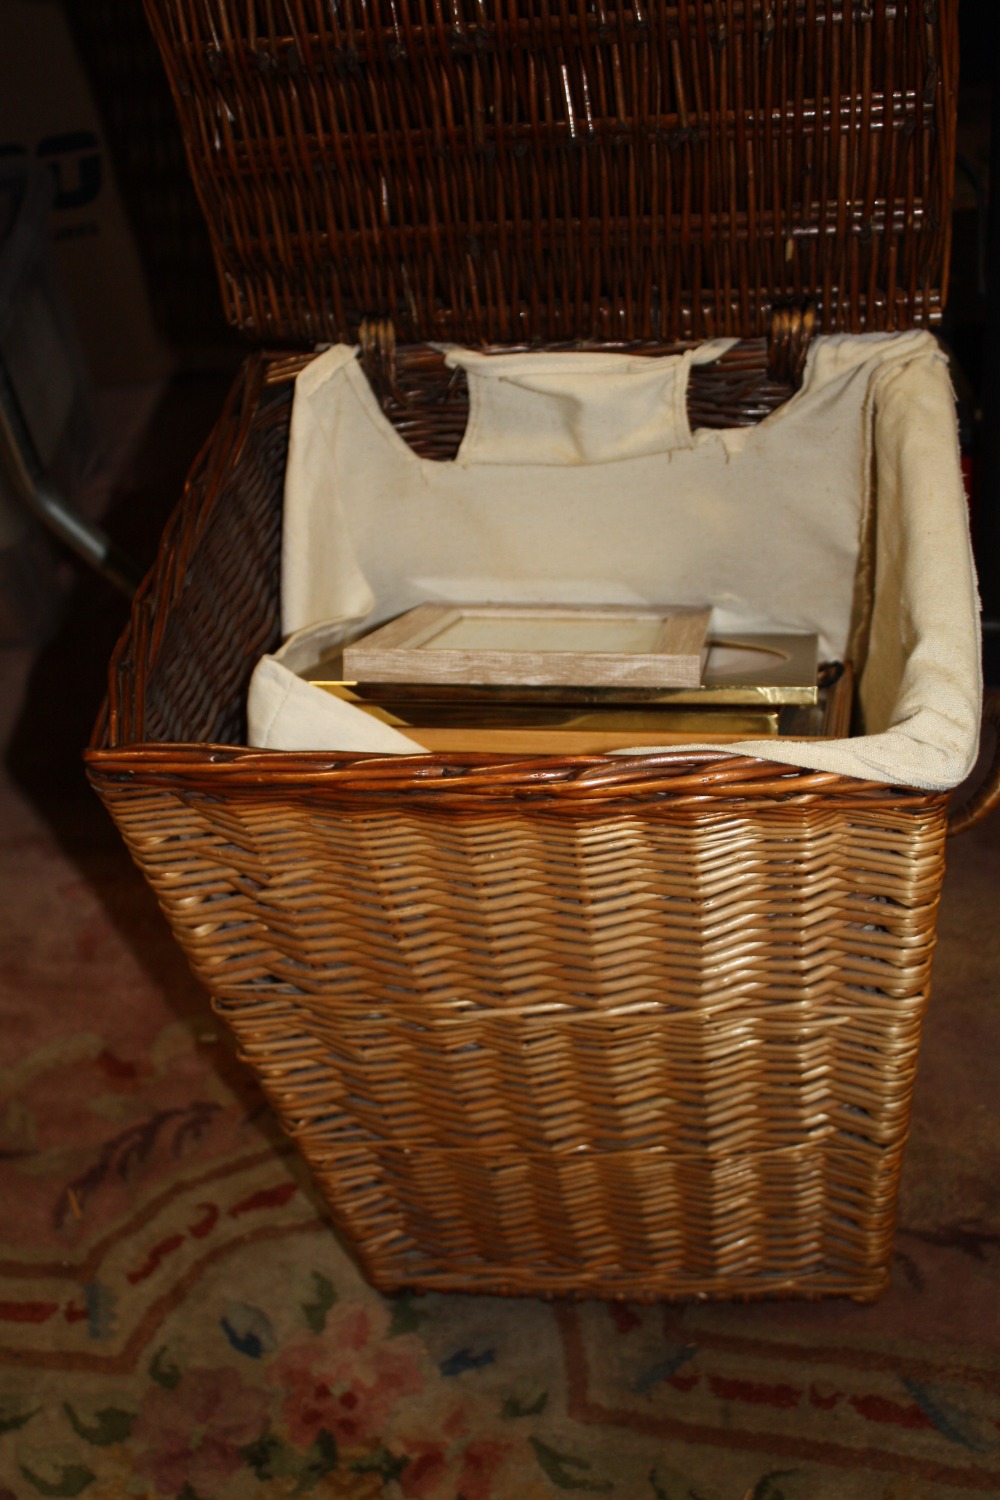 A WICKER BASKET CONTAINING PICTURE FRAMES